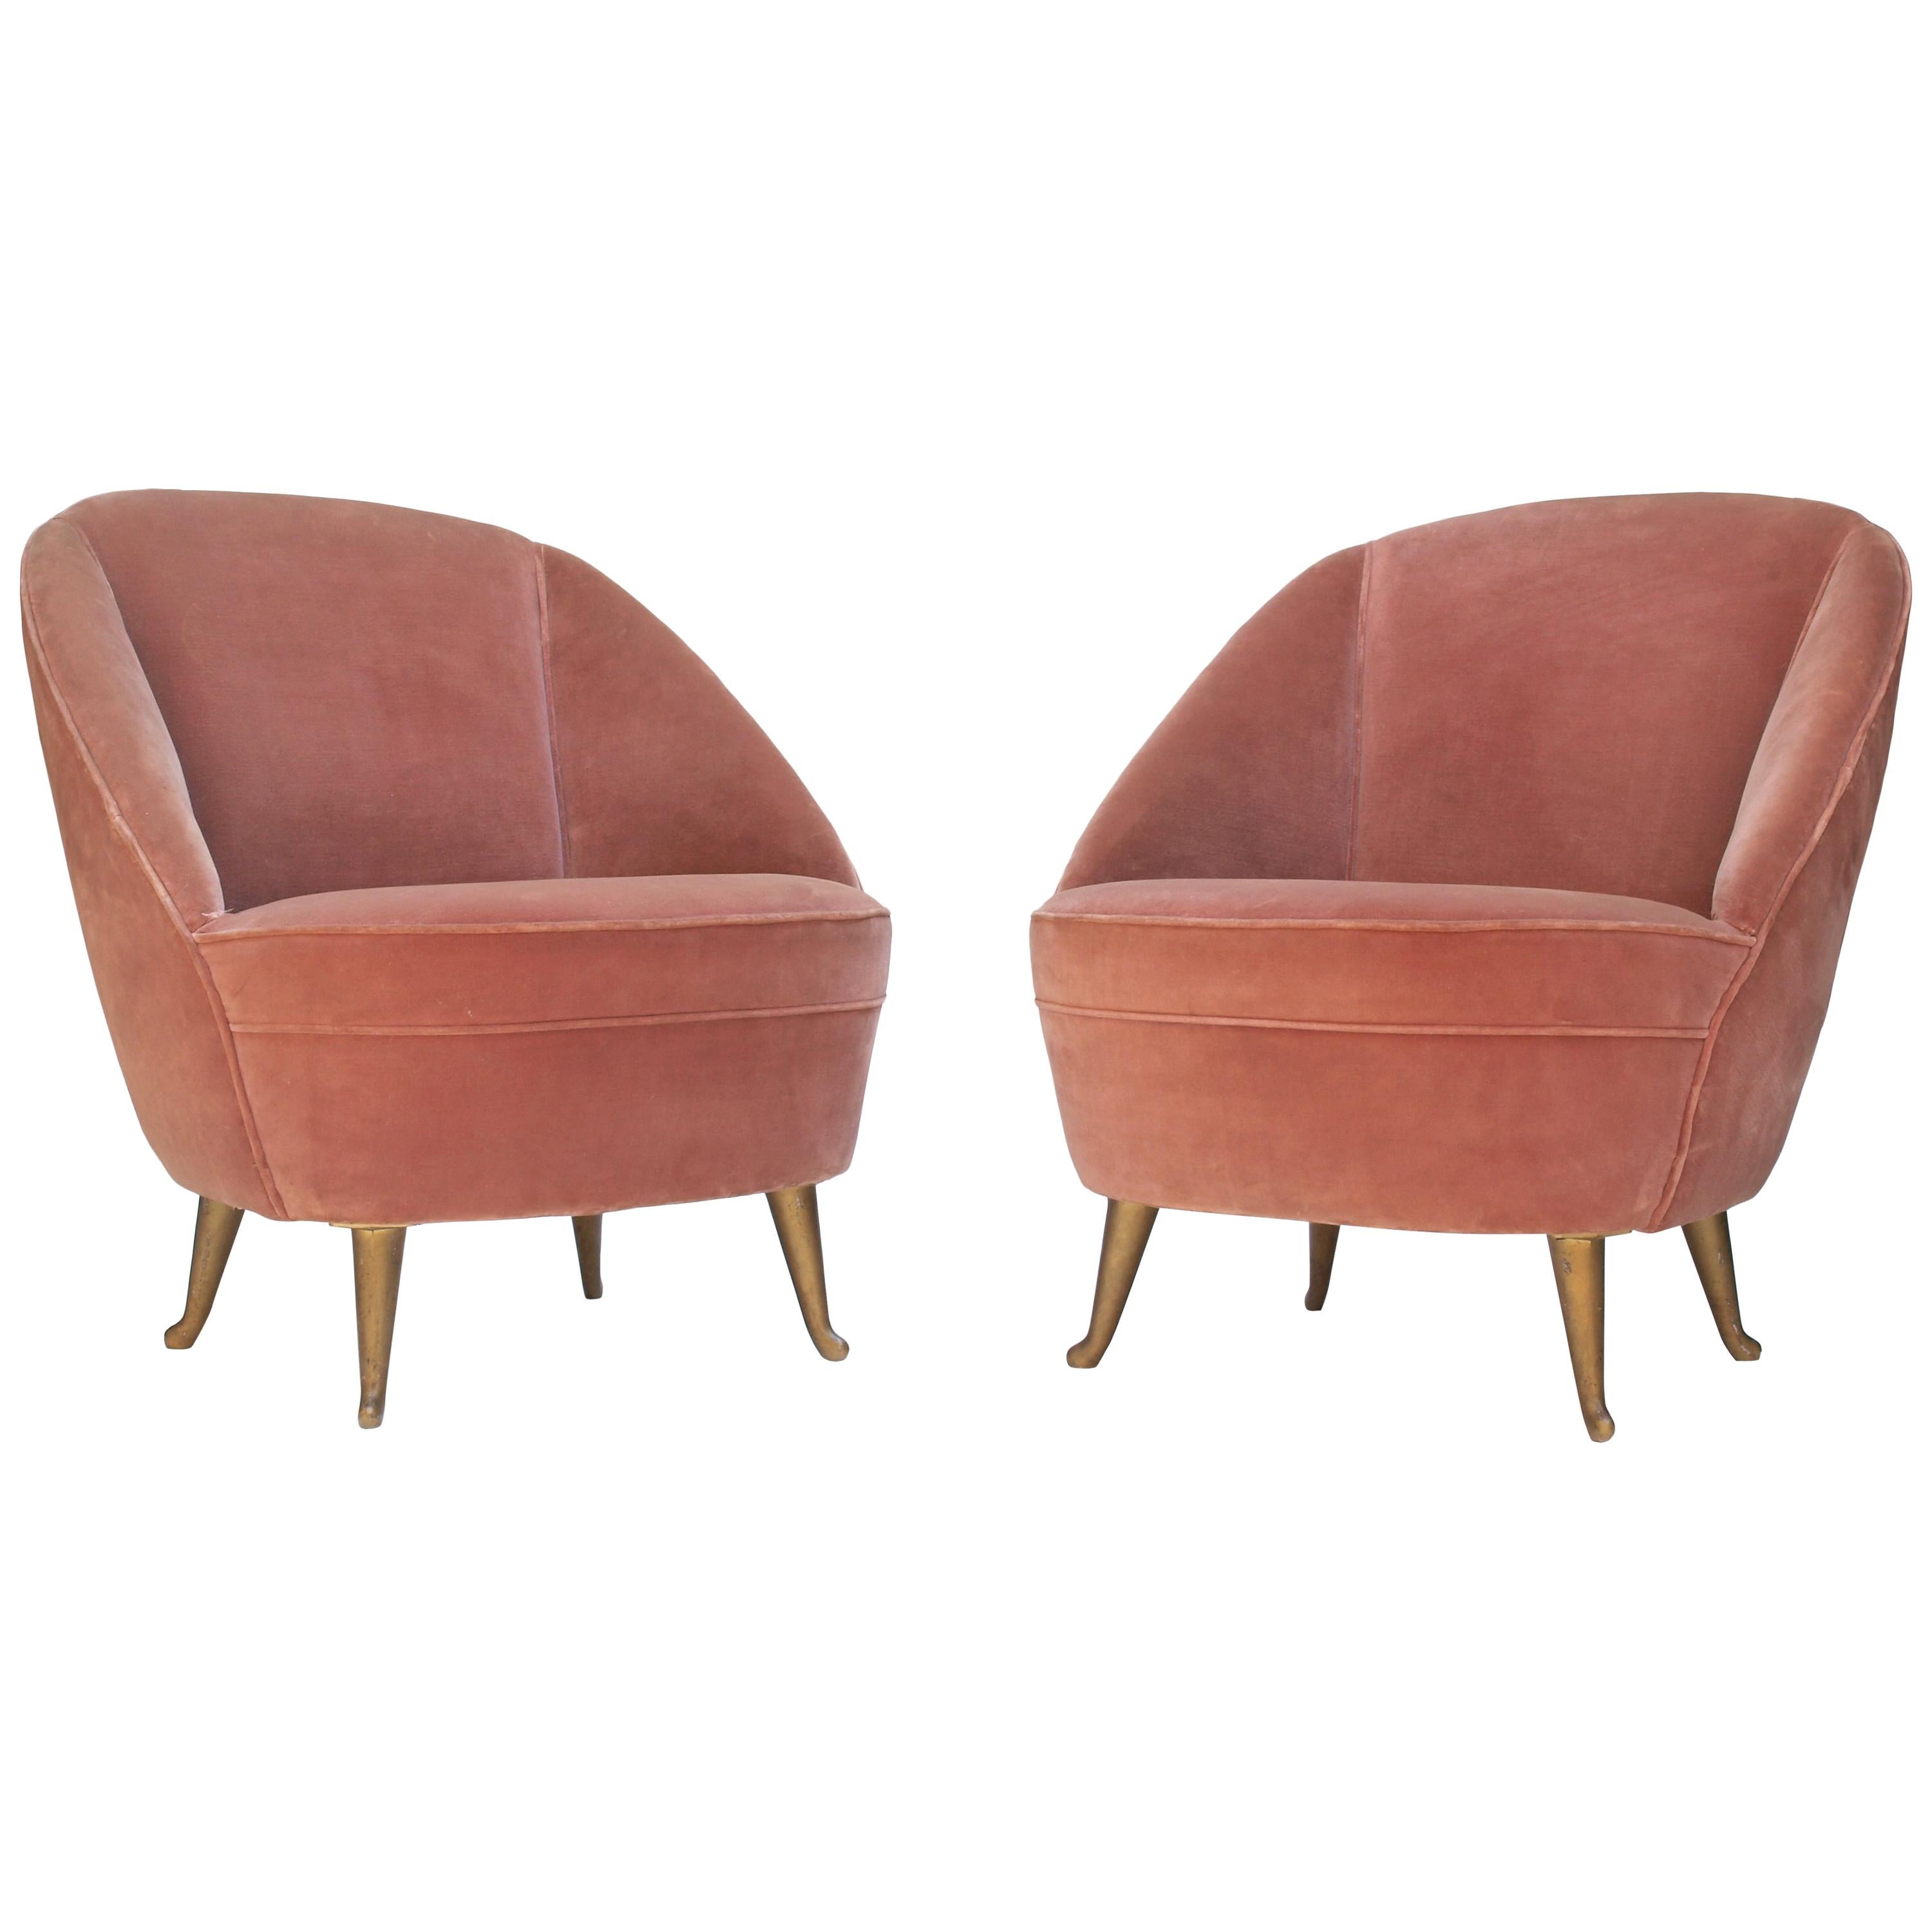 Pair of Side Chairs for I.S.A Bergamo, 1950s